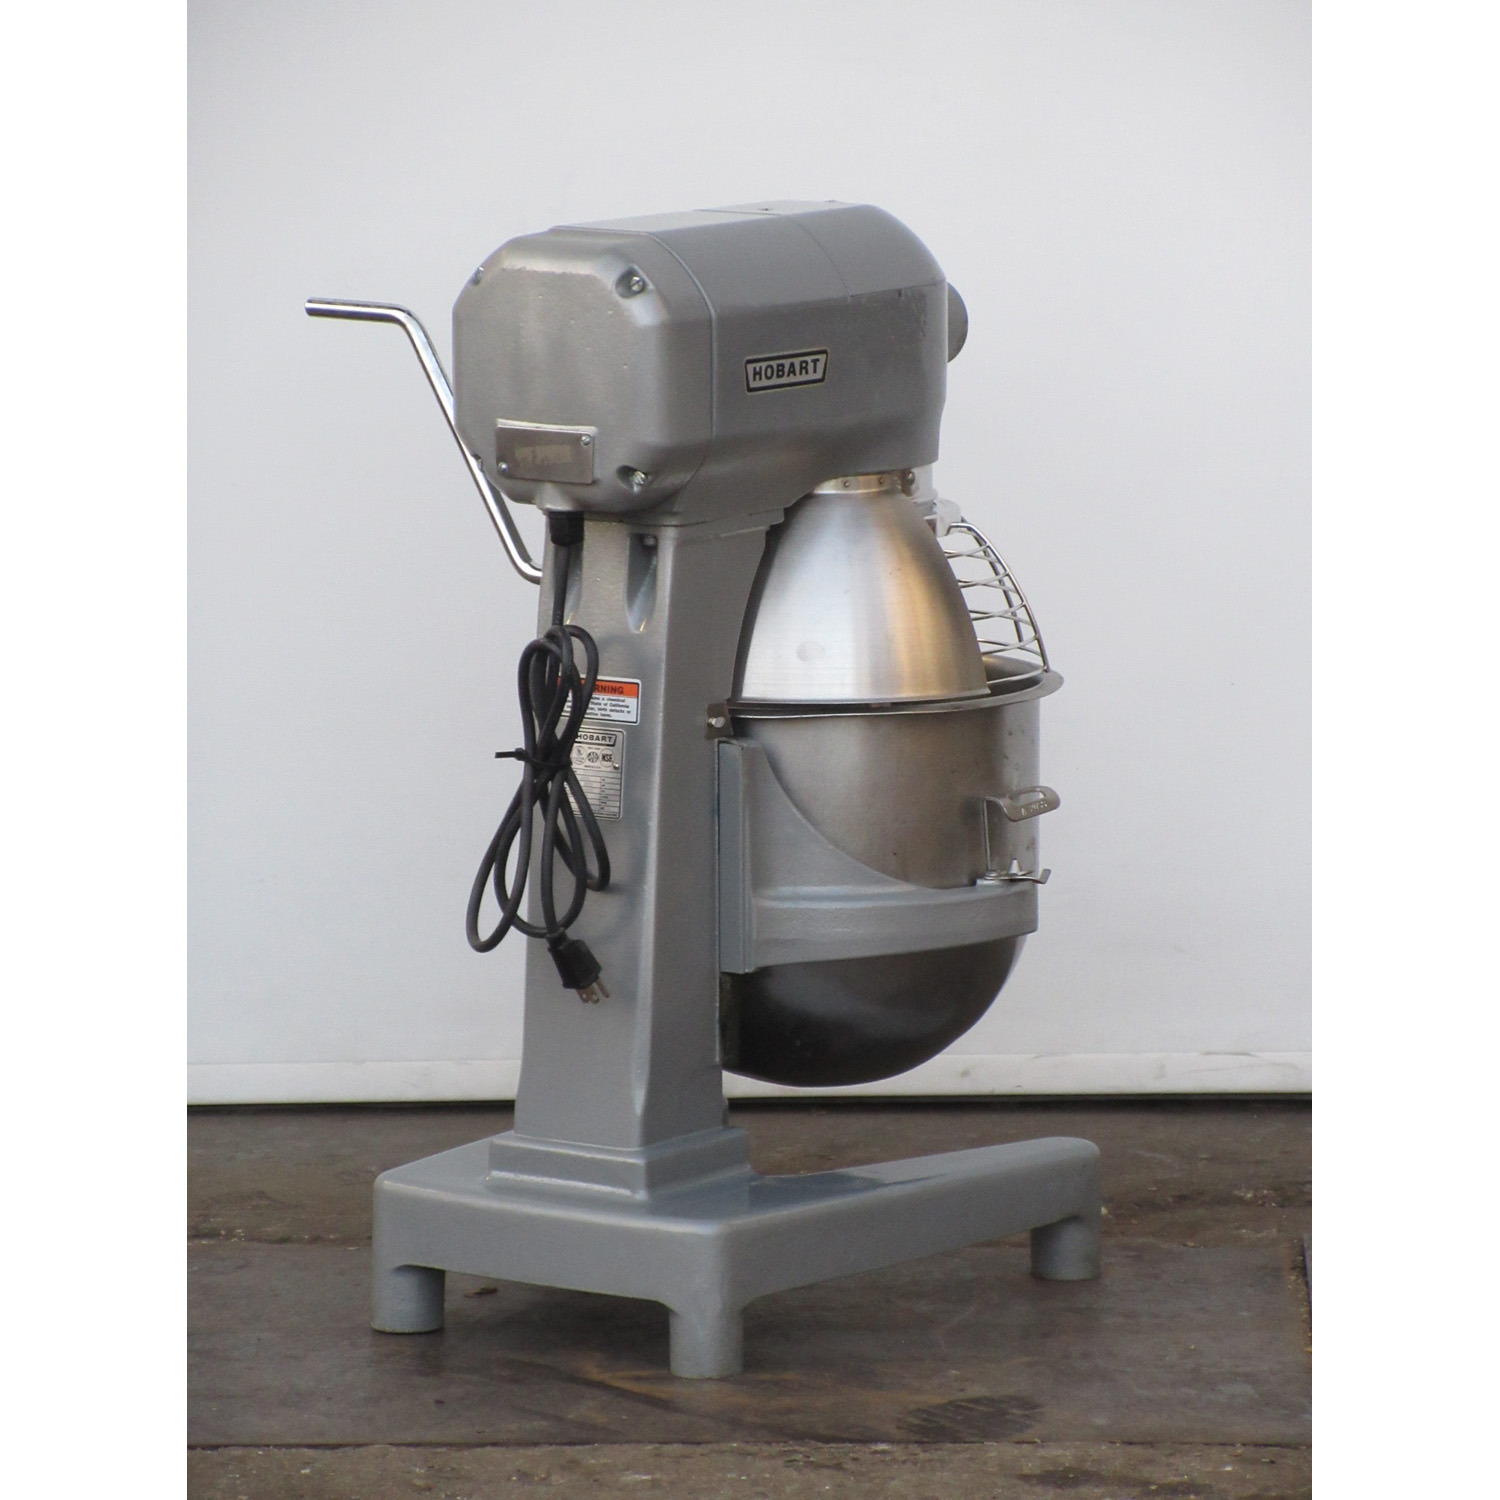 Hobart 20 Quart A200 Stand Mixer, Used Excellent Condition image 2